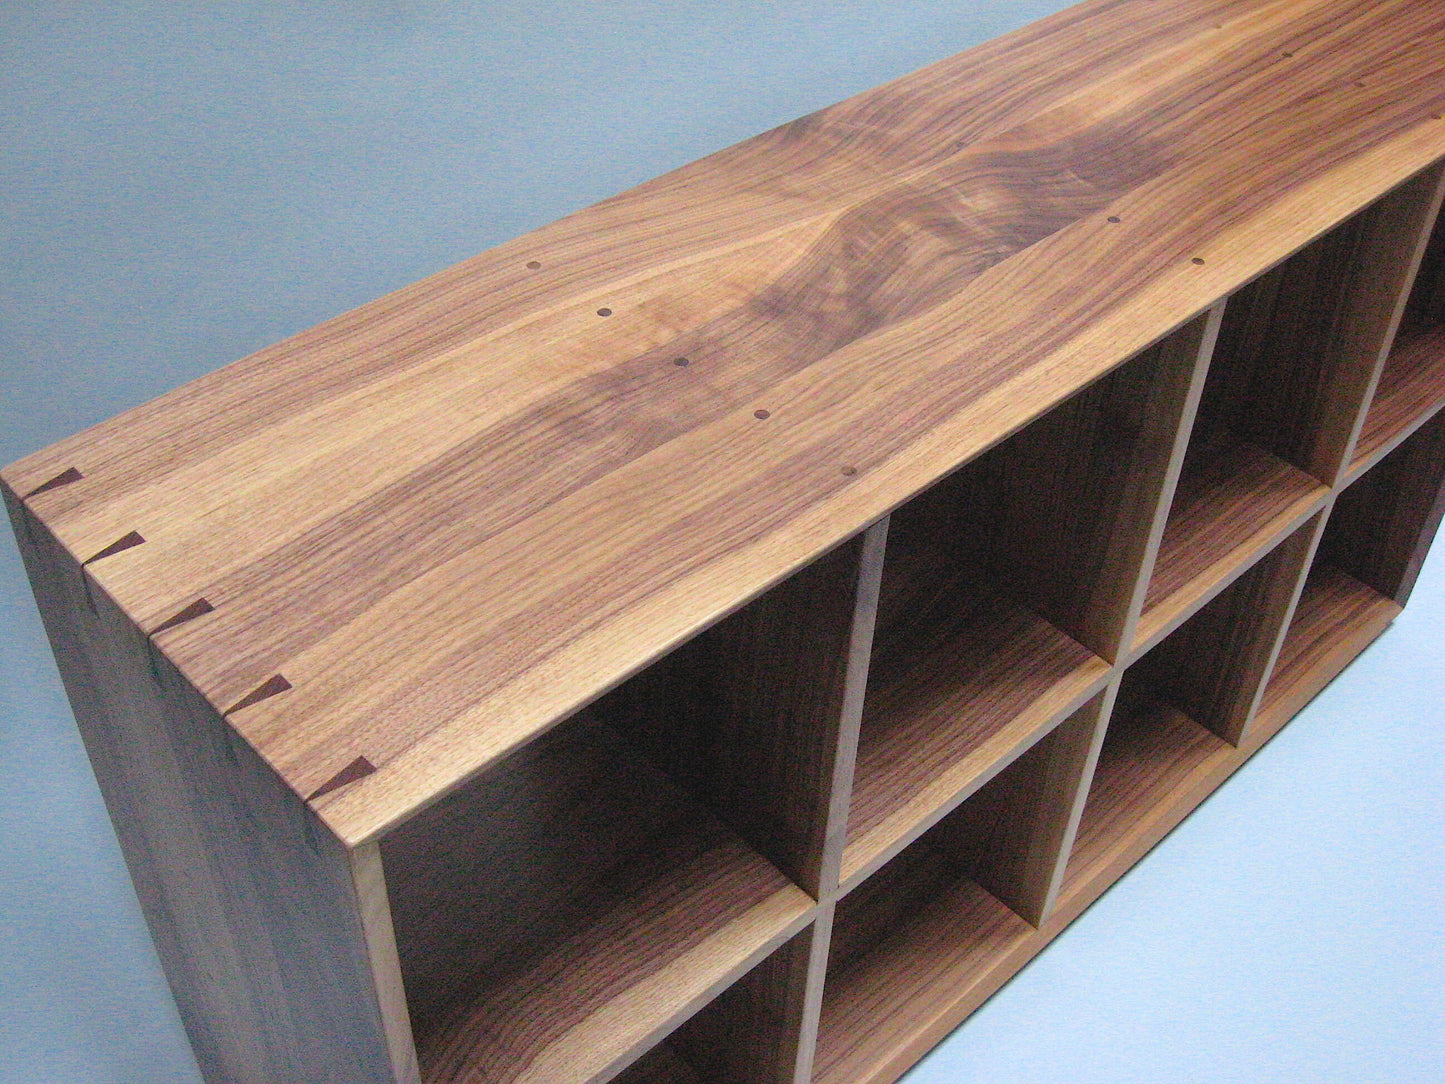 Quartered Walnut Bookcase with Open Back